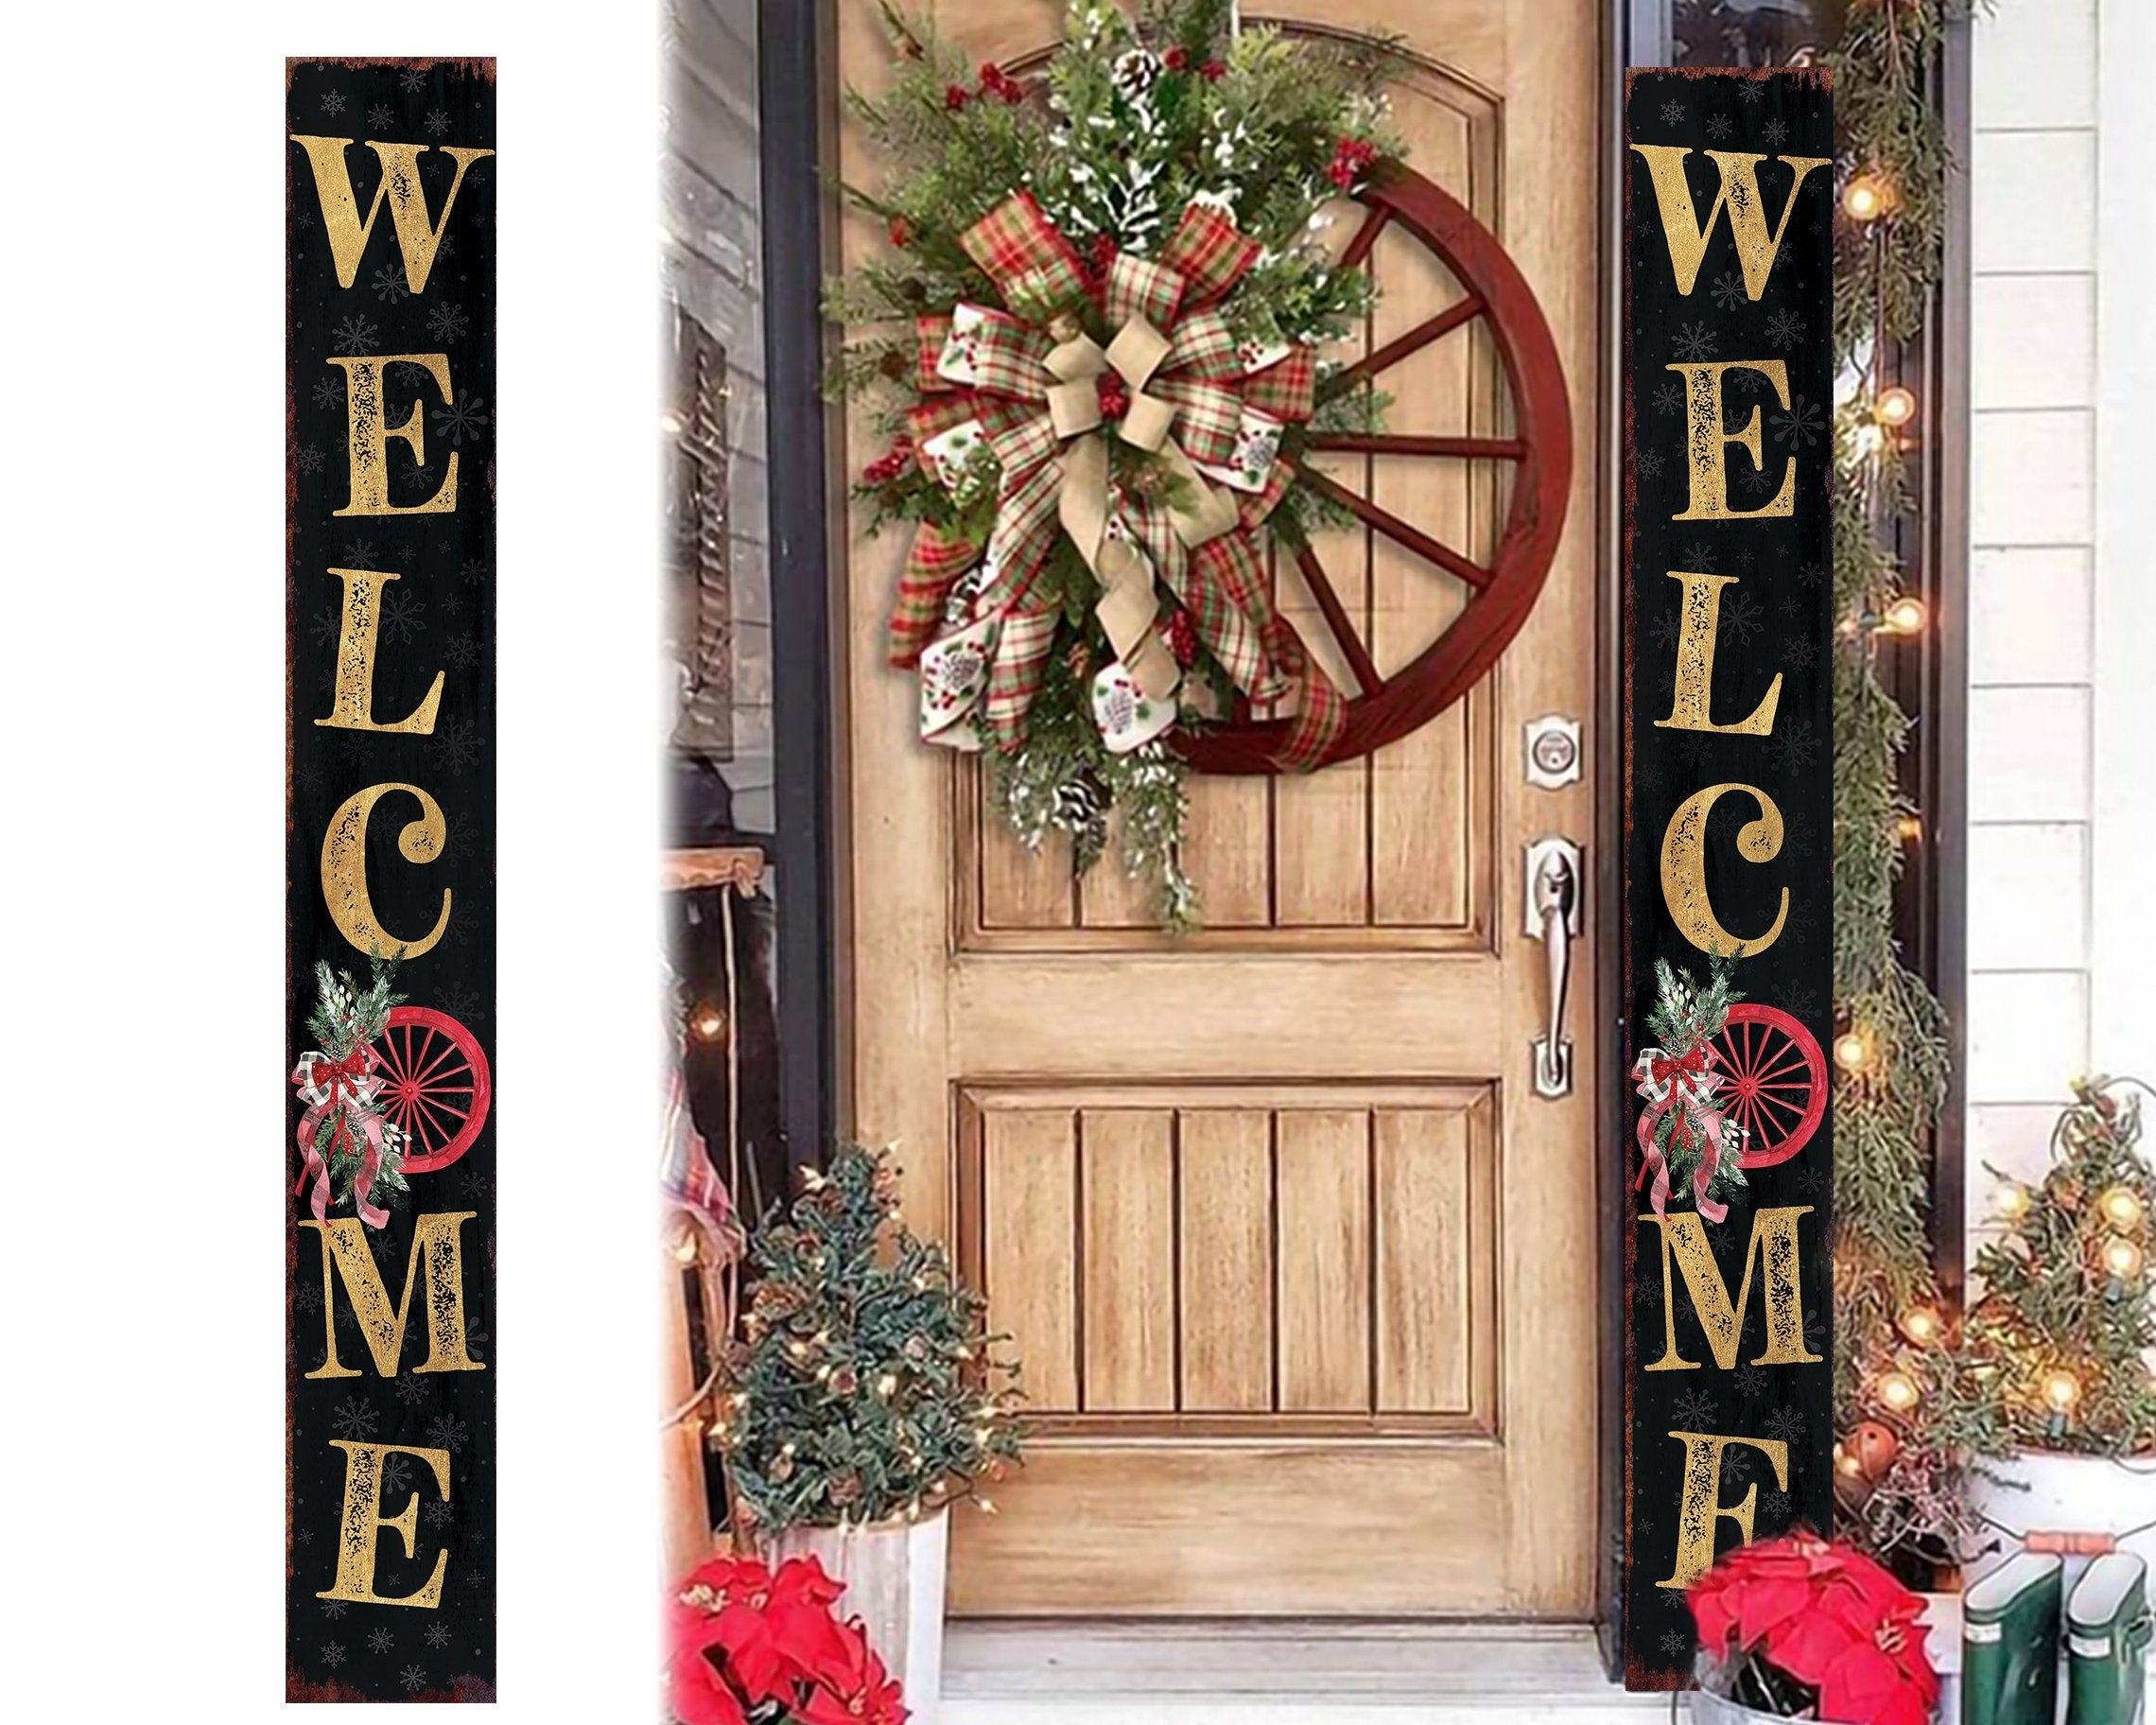 72in-Welcome-with-Wagon-Wheel-Wreath-Christmas-Porch-Sign-Front-Porch-Welcome-Sign-Home-Decor,-Vintage-Holiday-Christmas-Decor-for-Outdoor-